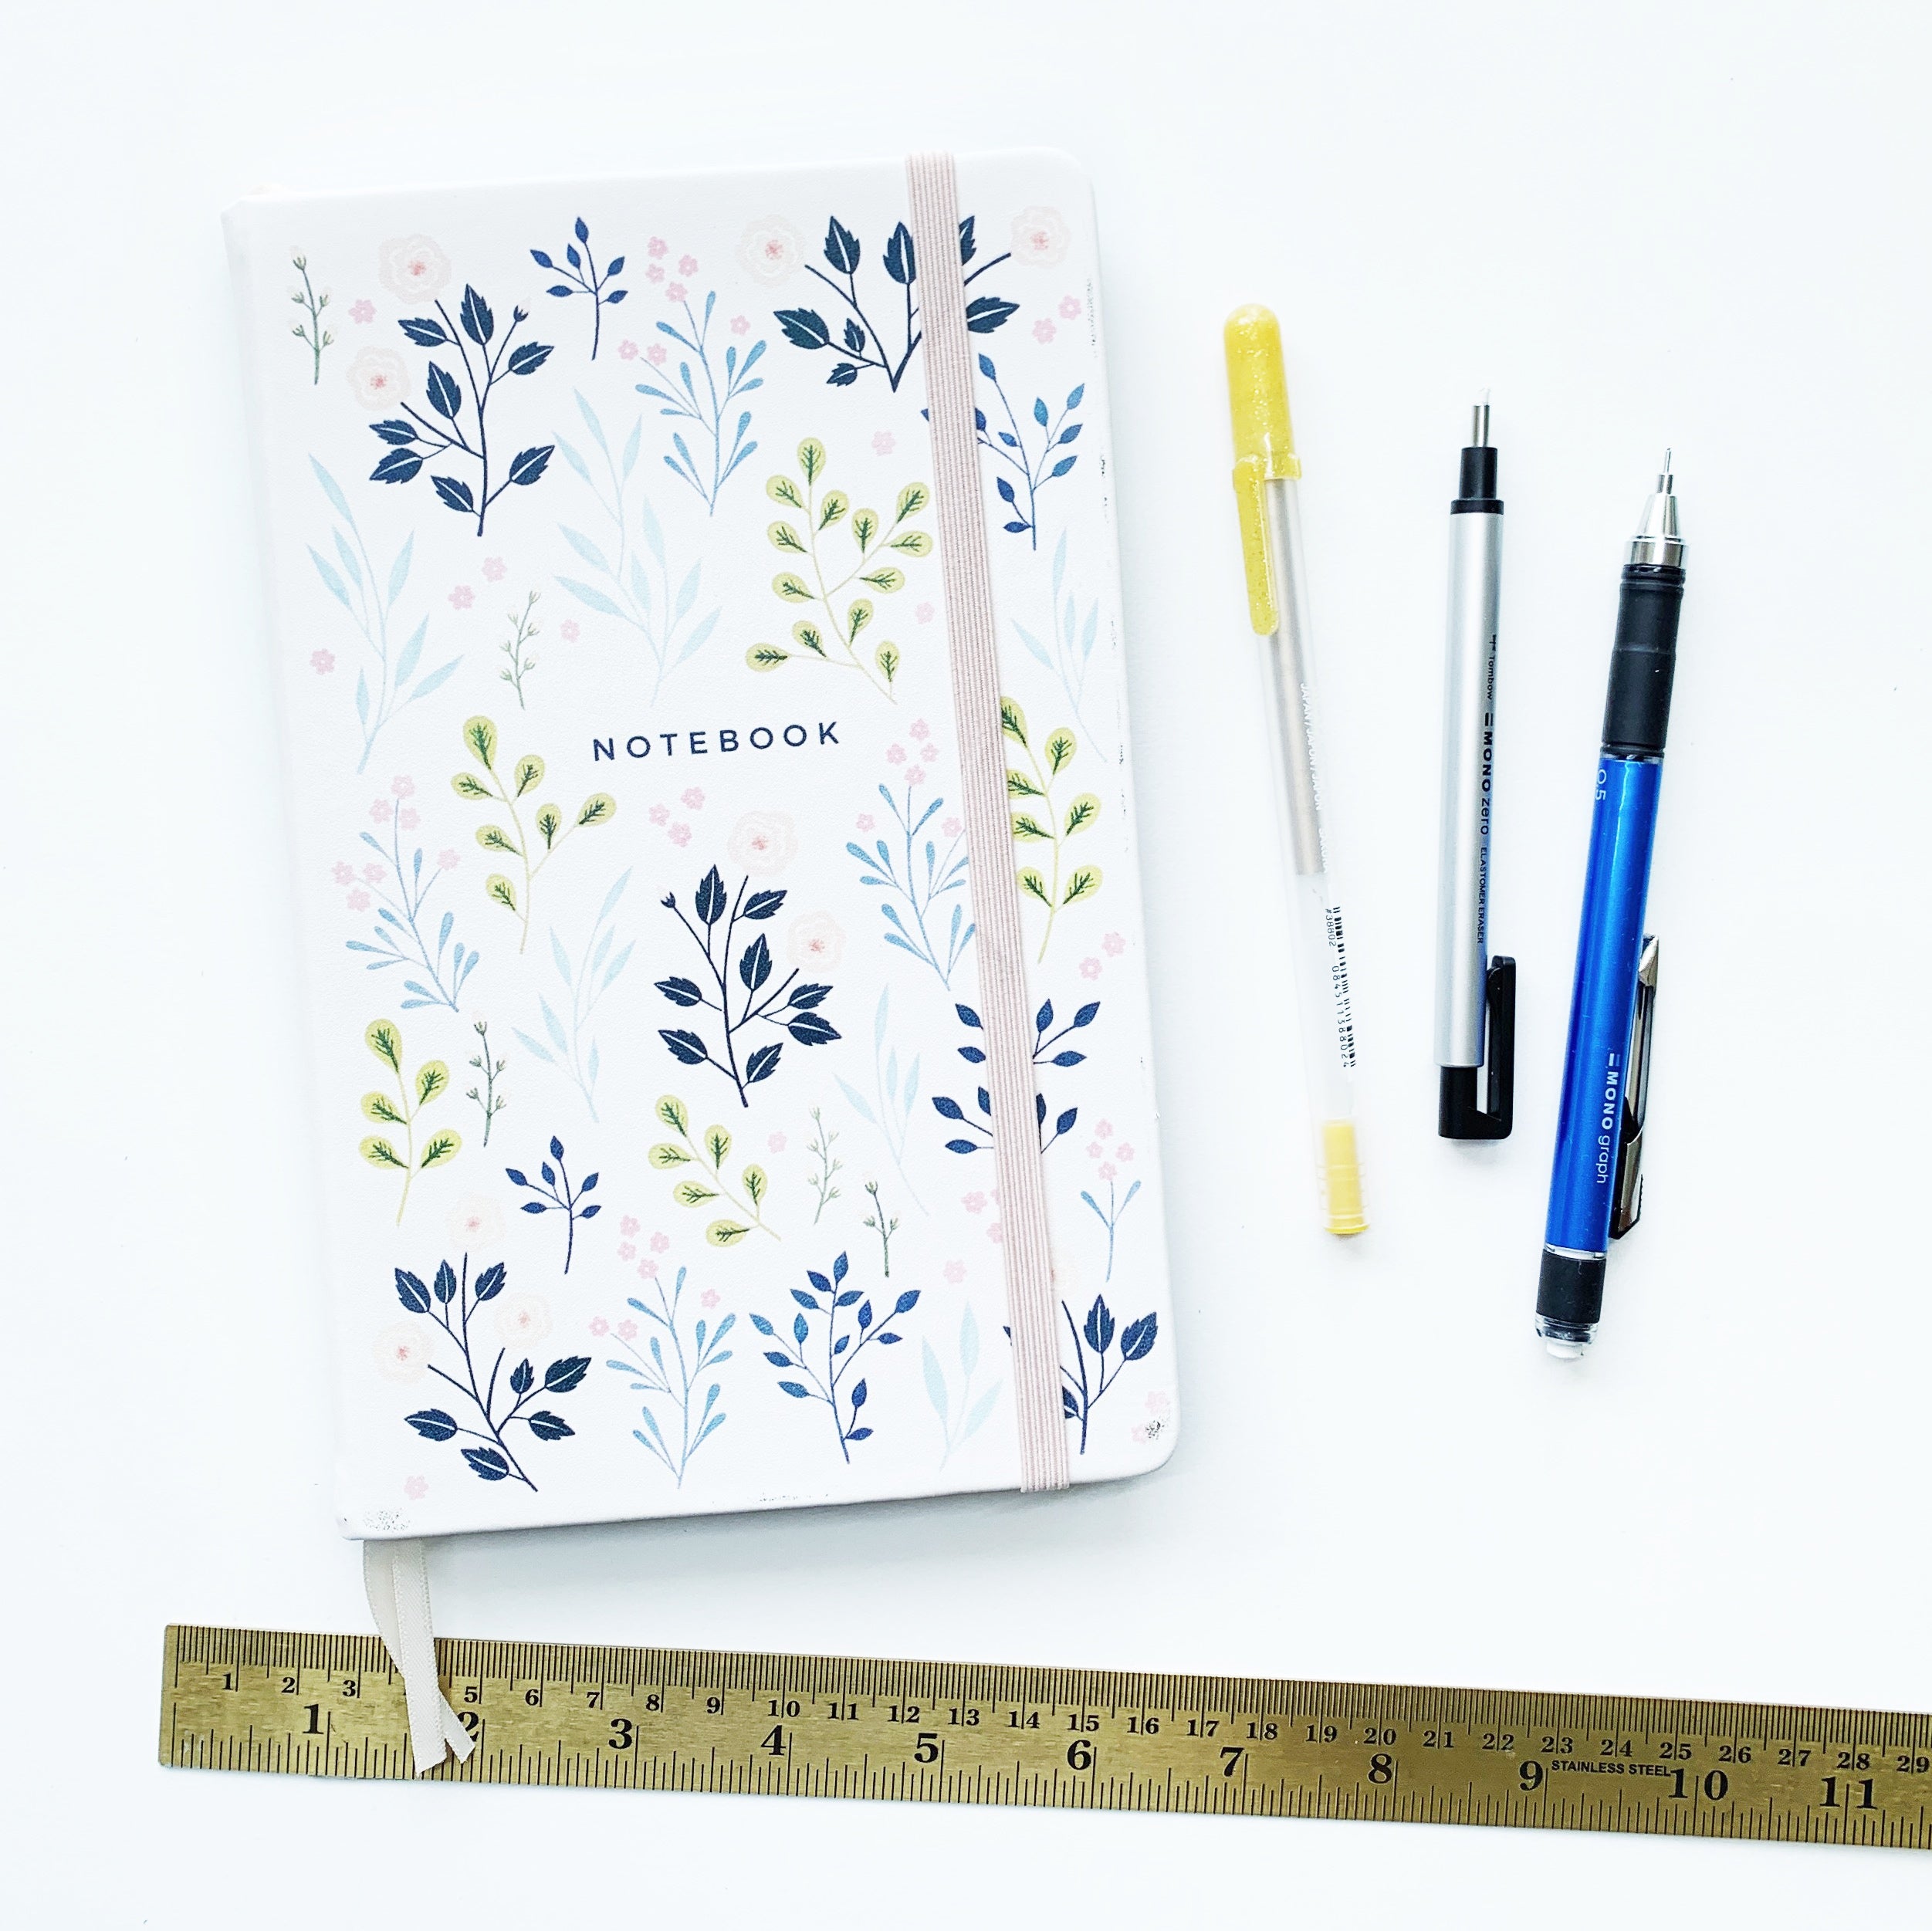 Learn how to create an ALL GOLD monthly bullet journal spread with Adrienne from @studio80design!